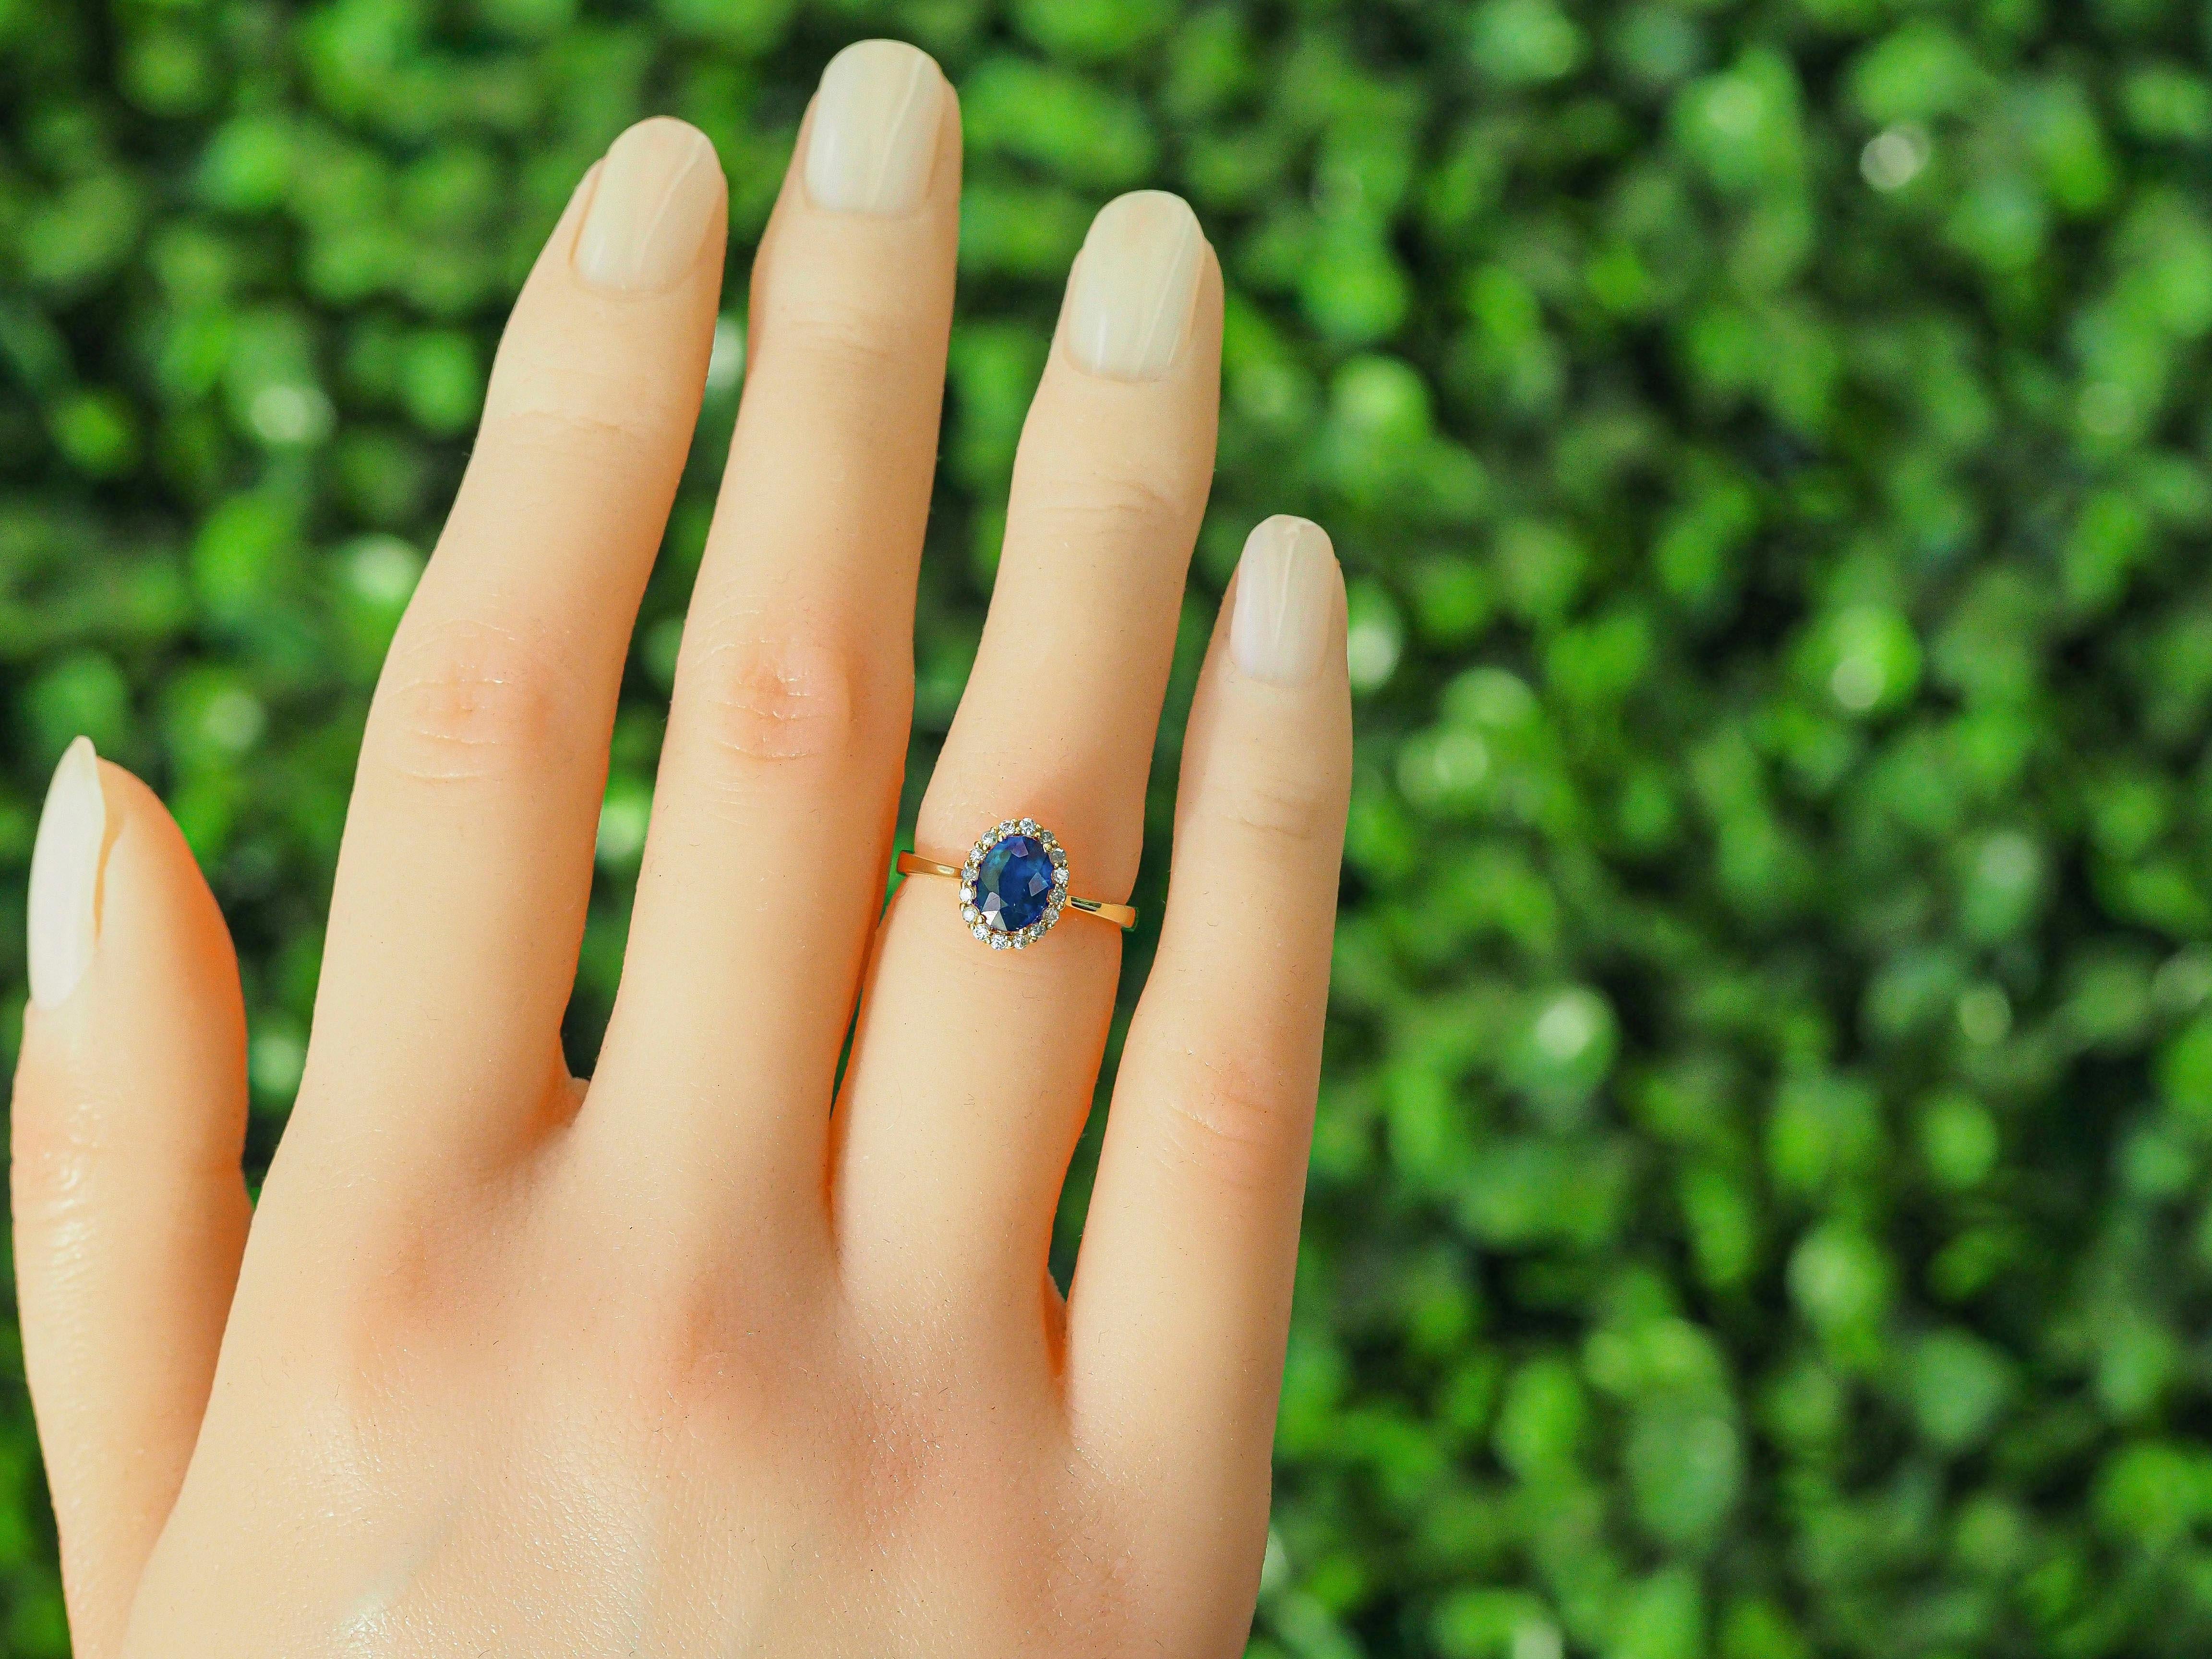 For Sale:  Sapphire ring with diamond halo. 6